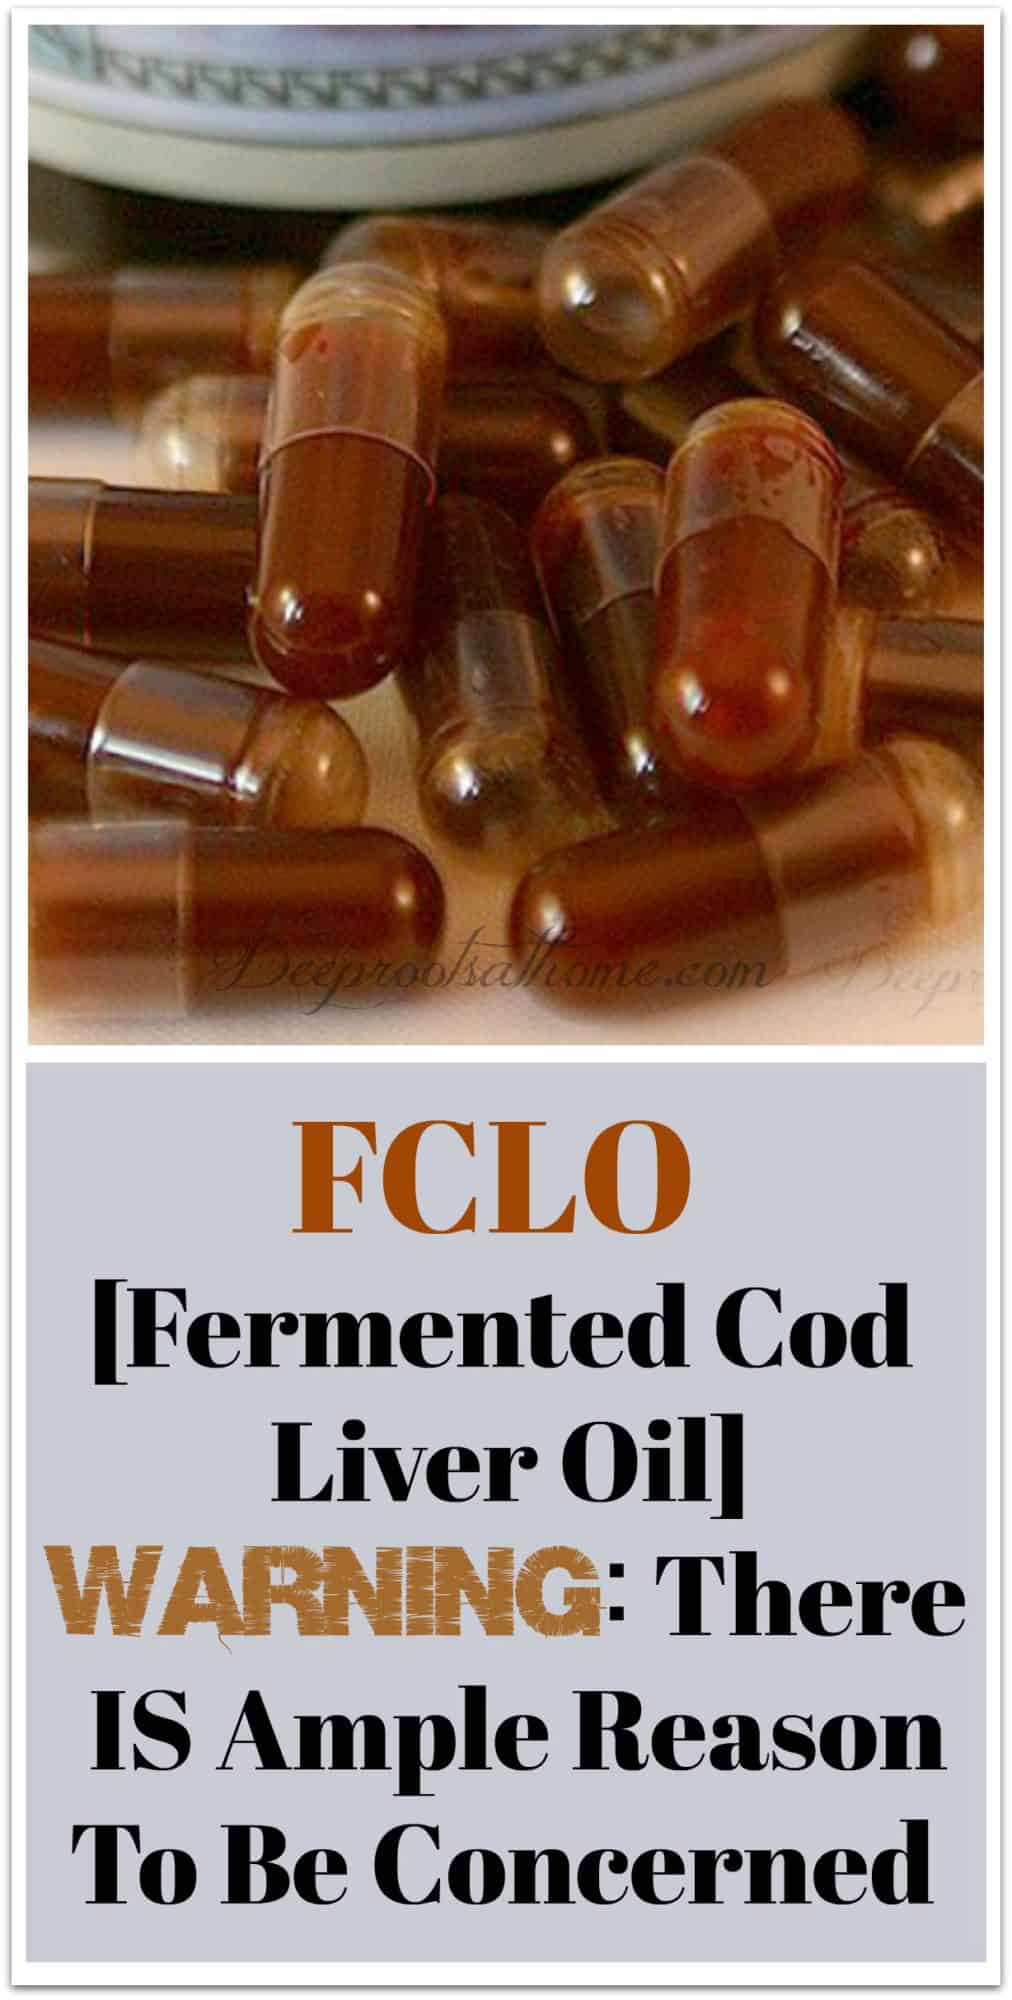 FCLO (Fermented Cod Liver Oil) Debate: Reason To Be Concerned? controversy, scandal, toxic, rancid, rancidity, not safe, health practitioners, Weston A. Price Foundation, WAPF, The Untold Story Of Milk, Dr. Ron Schmid, Rami Nagel, heart failure, cancer, whistleblower report, Dr. Kaayla Daniels, pulmonary embolisms, Wise Traditions, debate, truth, vindicated, bloggers, concerns, test results, fish broth starter, not fermented, Green Pastures, low levels of Vitamin D, Vitamin E, Vitamin K, vitamin A, codfish, Alaskan pollock, health effects of rancidity, vitamin deficiencies, do your own research